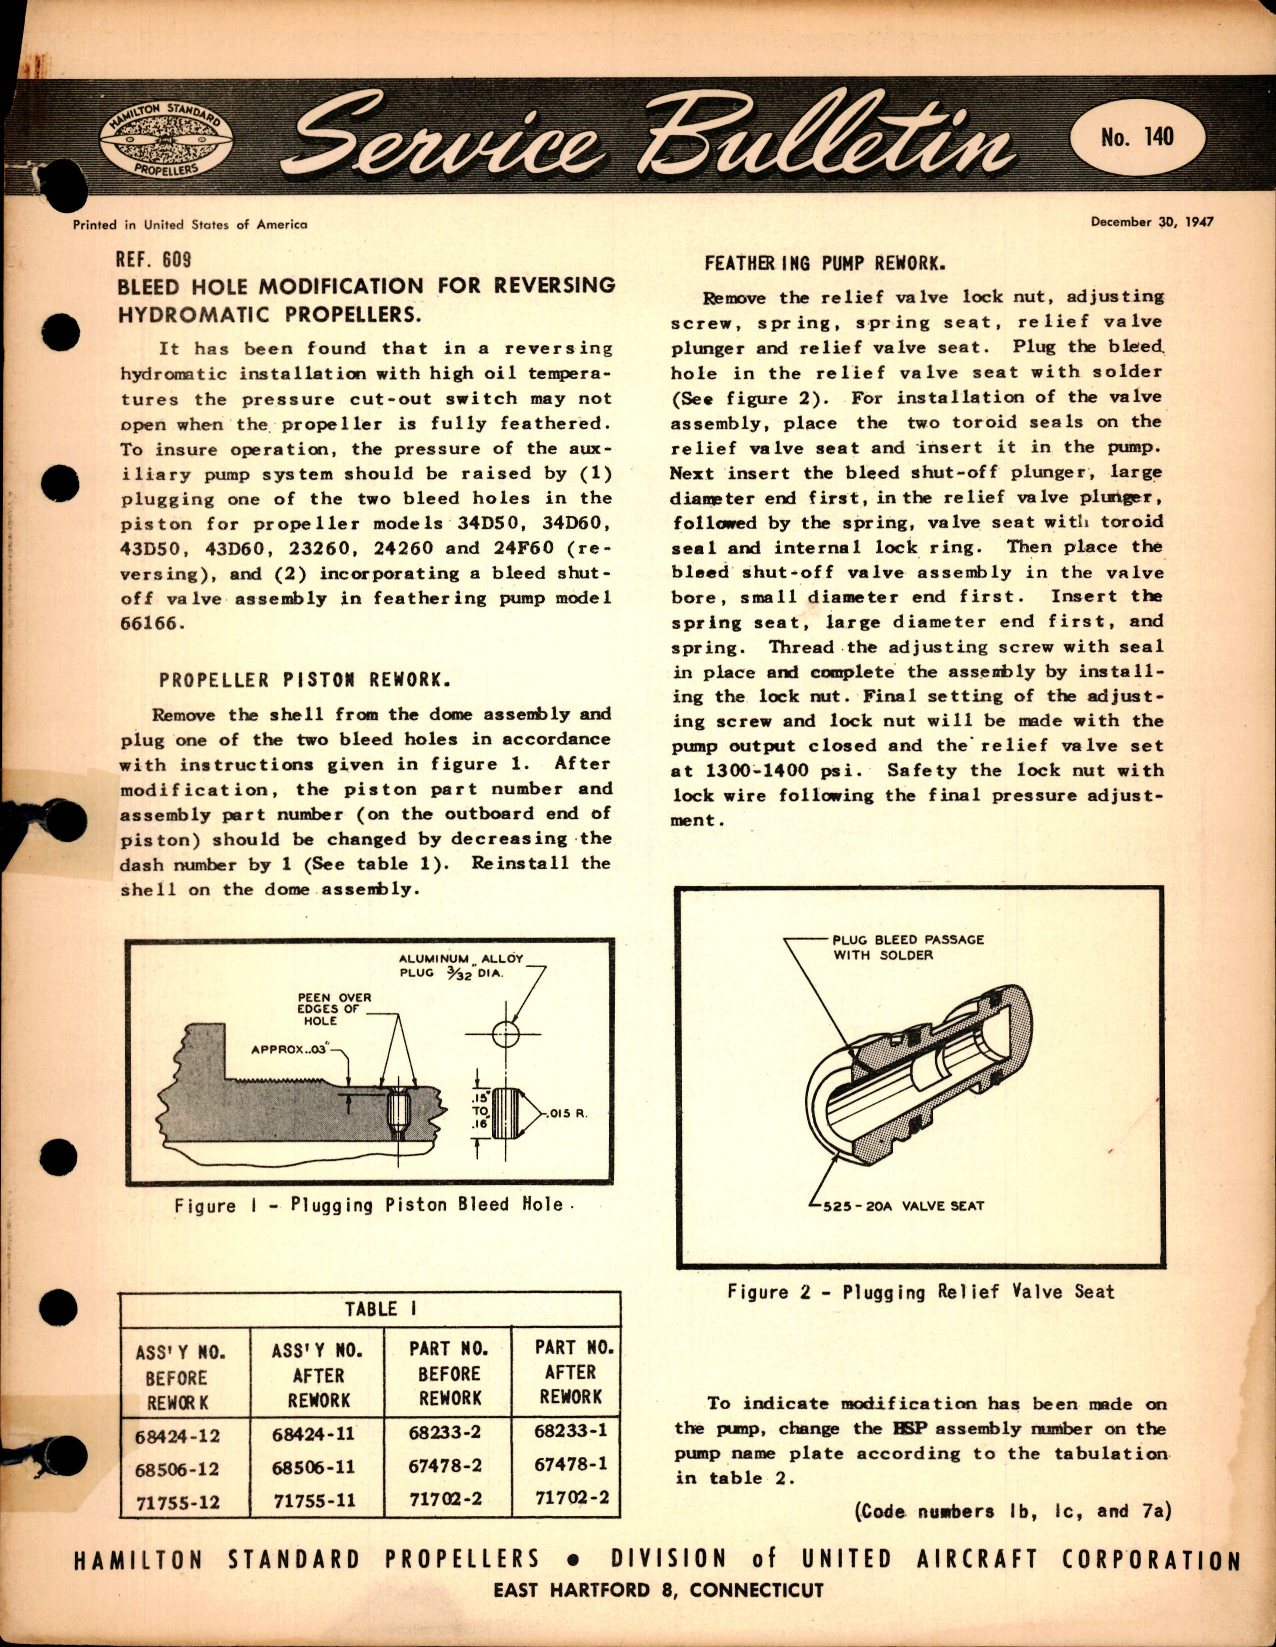 Sample page 1 from AirCorps Library document: Bleed Hole Modification for Reversing Hydromatic Propellers, Ref 609